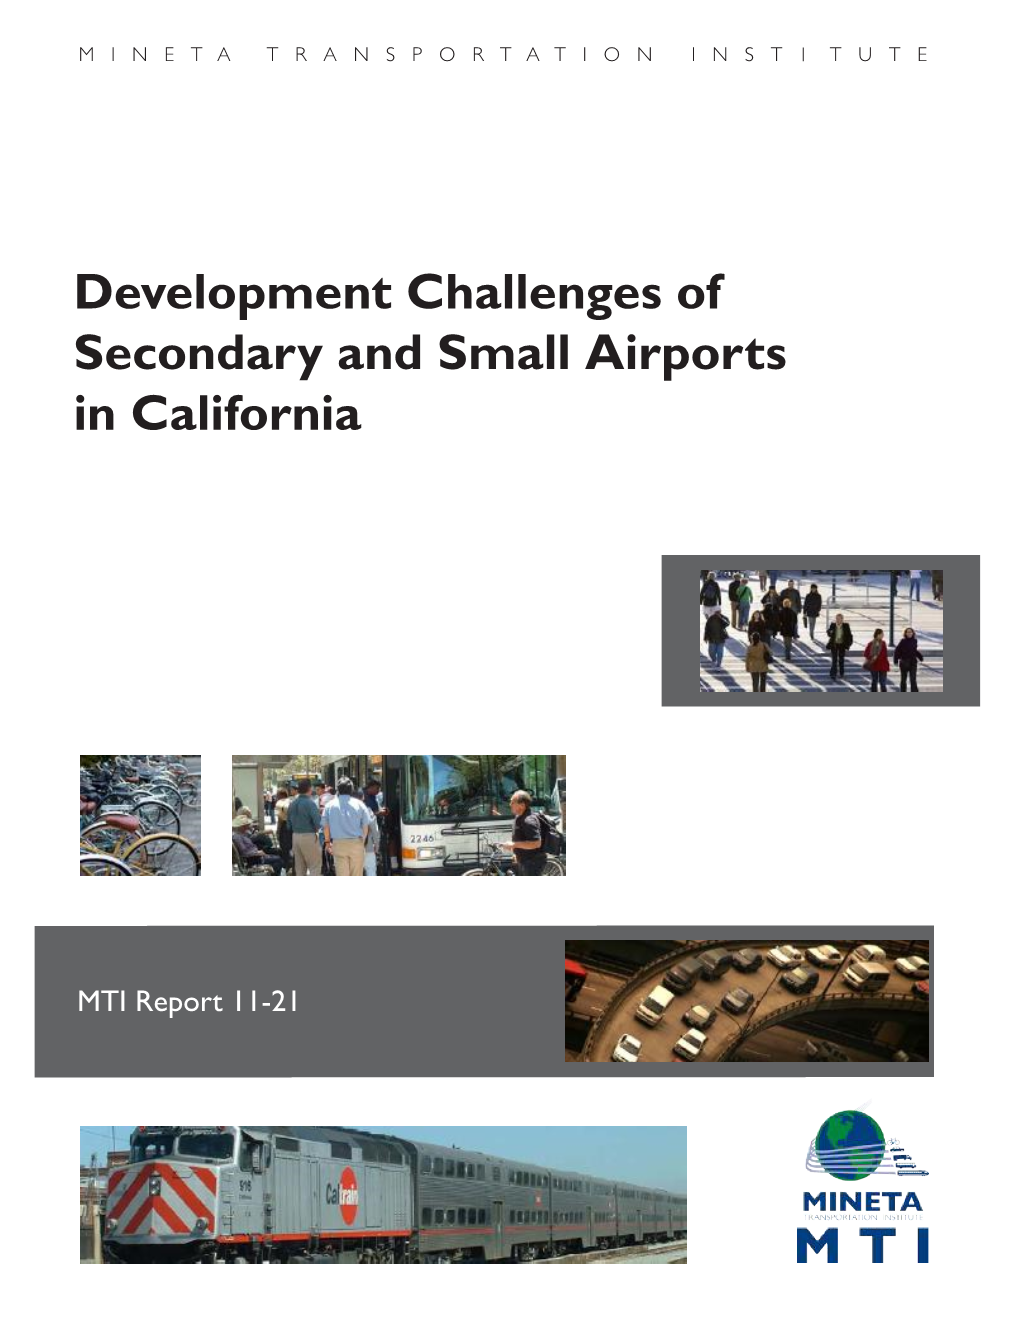 Development Challenges of Secondary and Small Airports in California